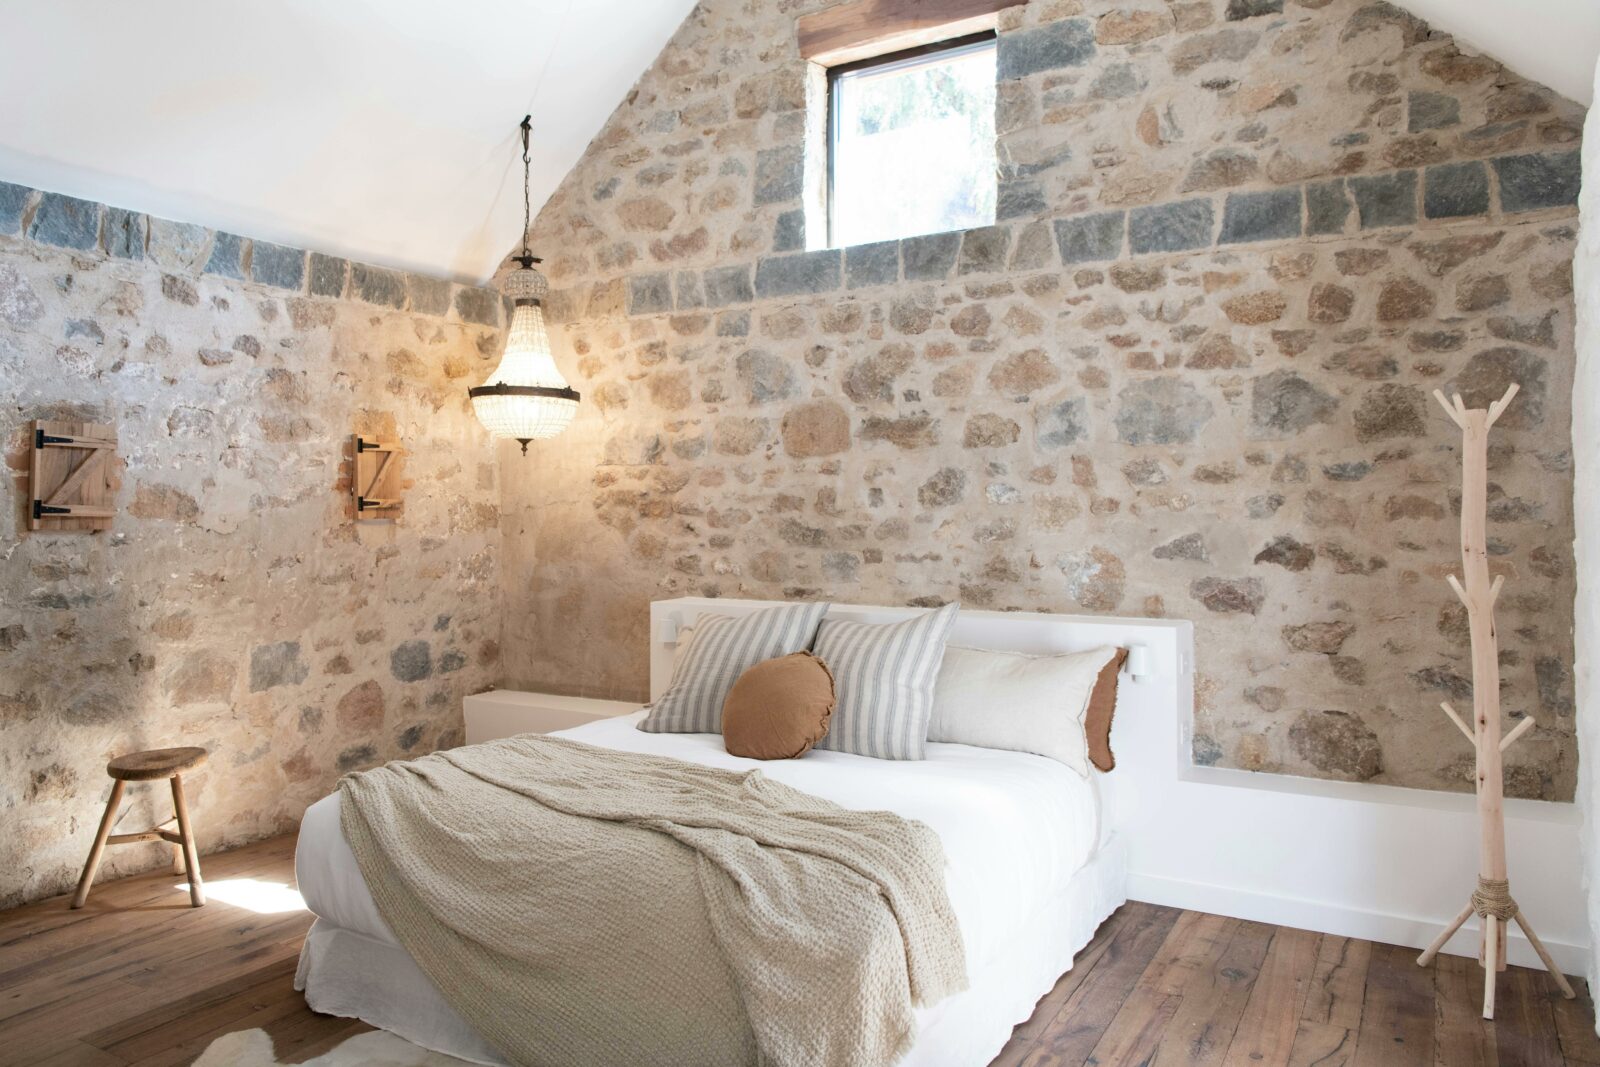 Beautiful bedroom room with stone walls and high ceiling.